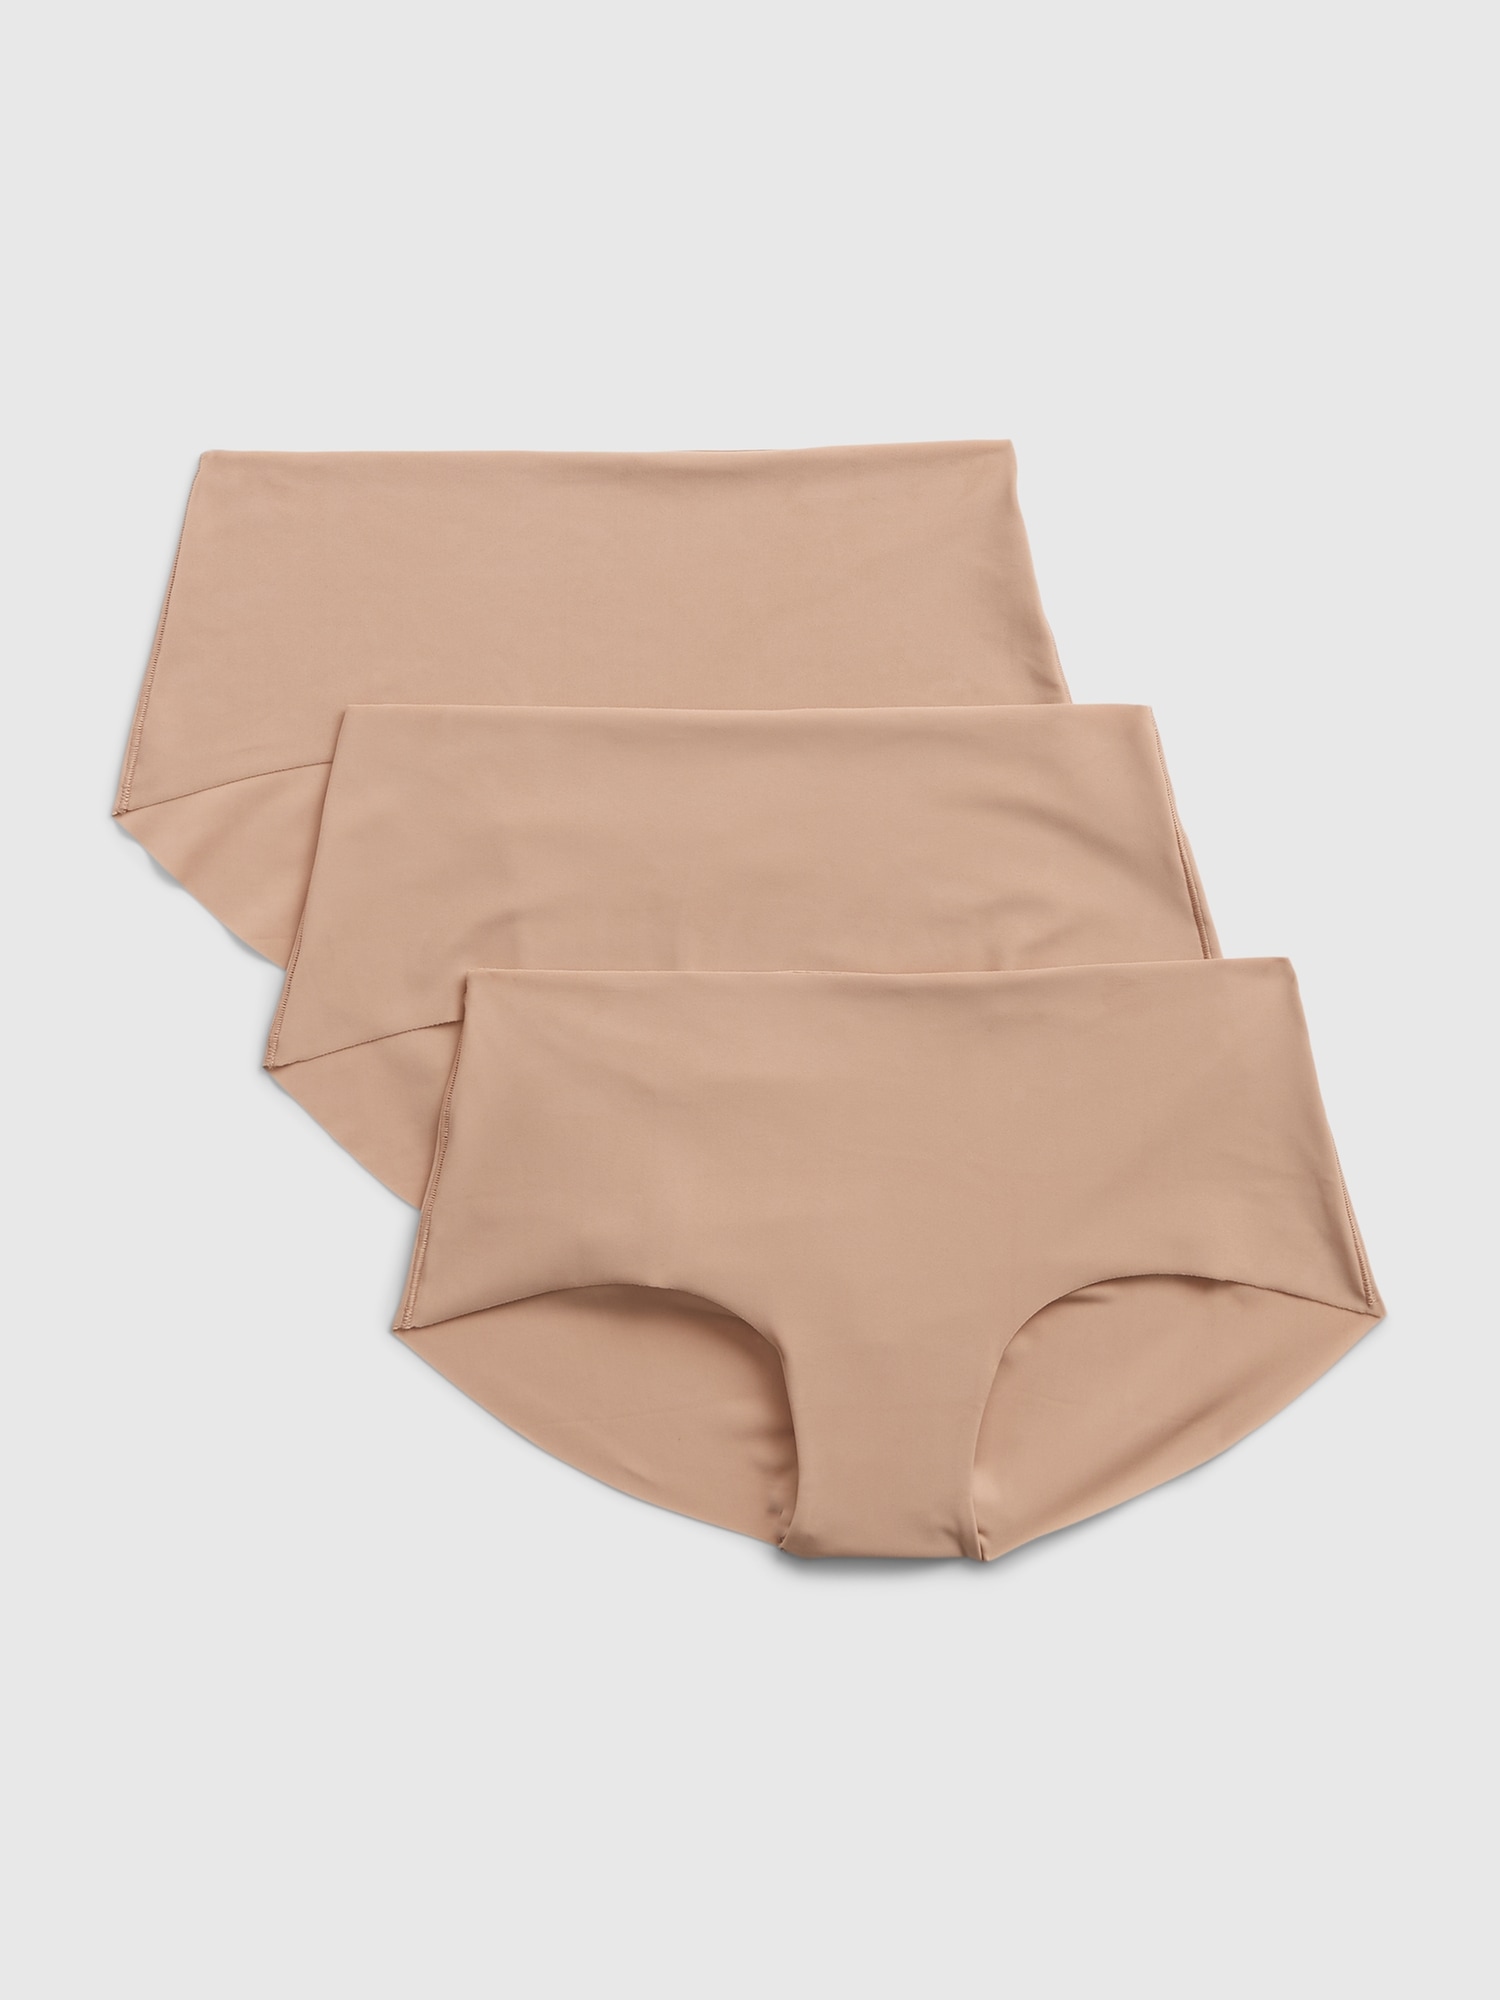 Women's Seamless Hipster Panty (Pack of 1) at Rs 261/piece